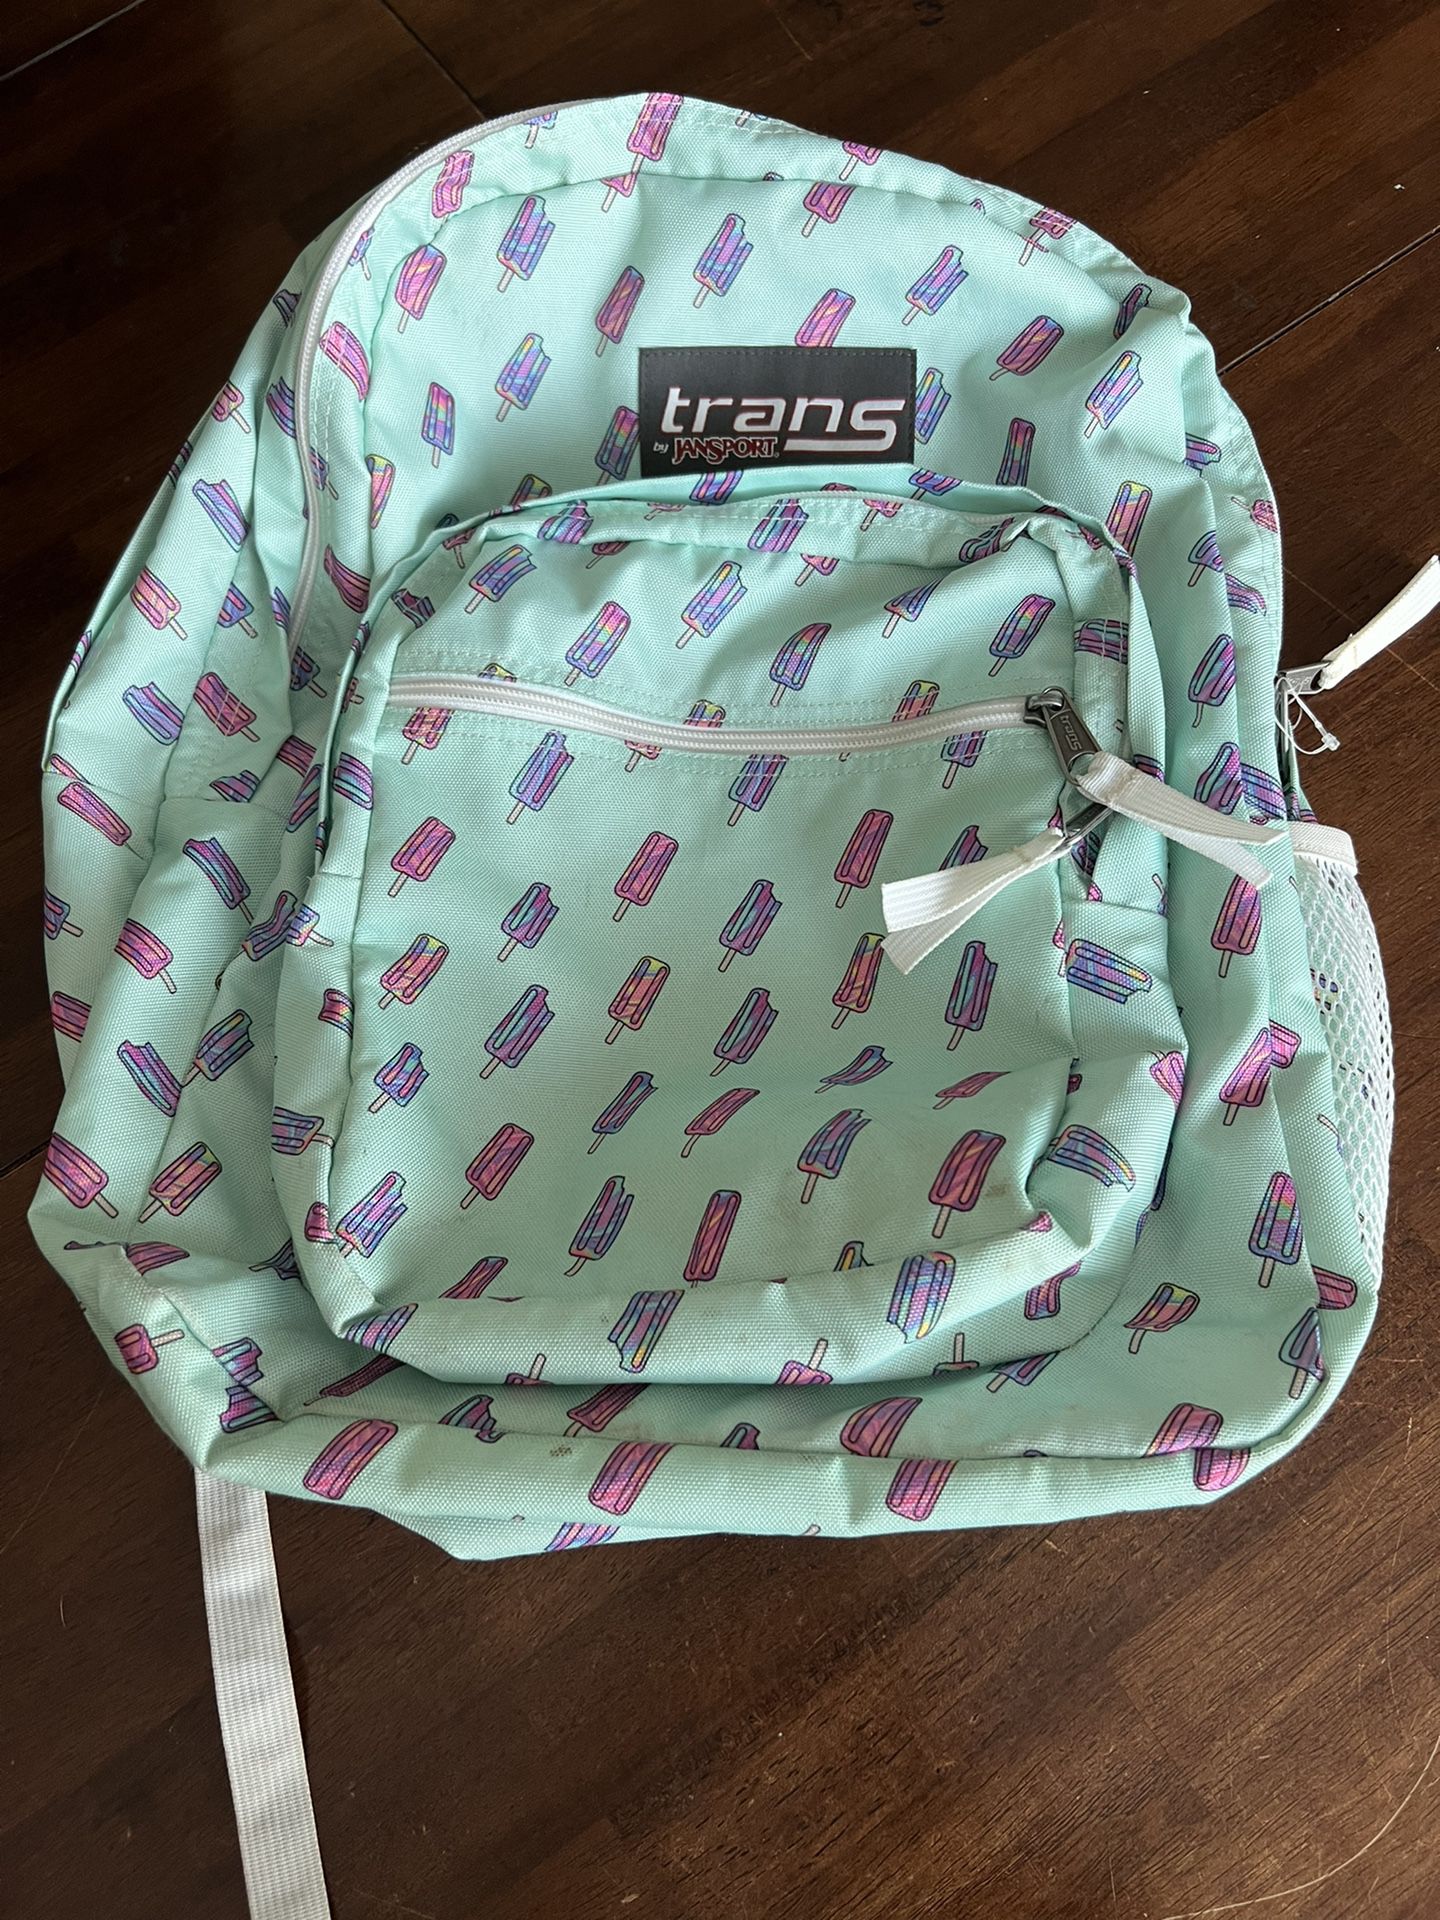 Trans, By Jansport Backpack